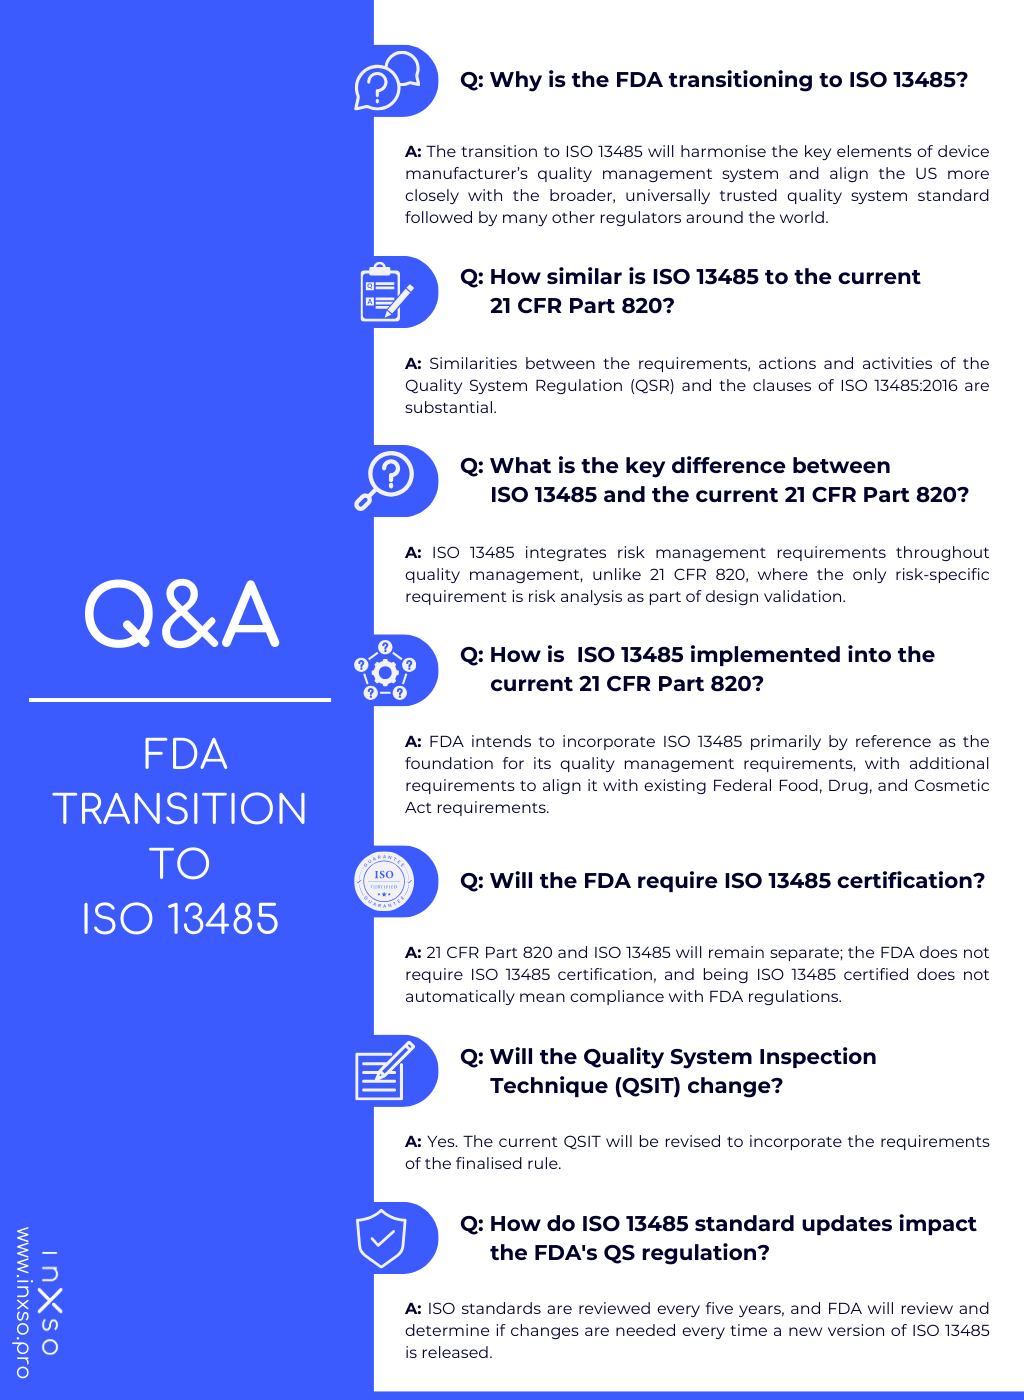 FDA Transition to ISO 13485